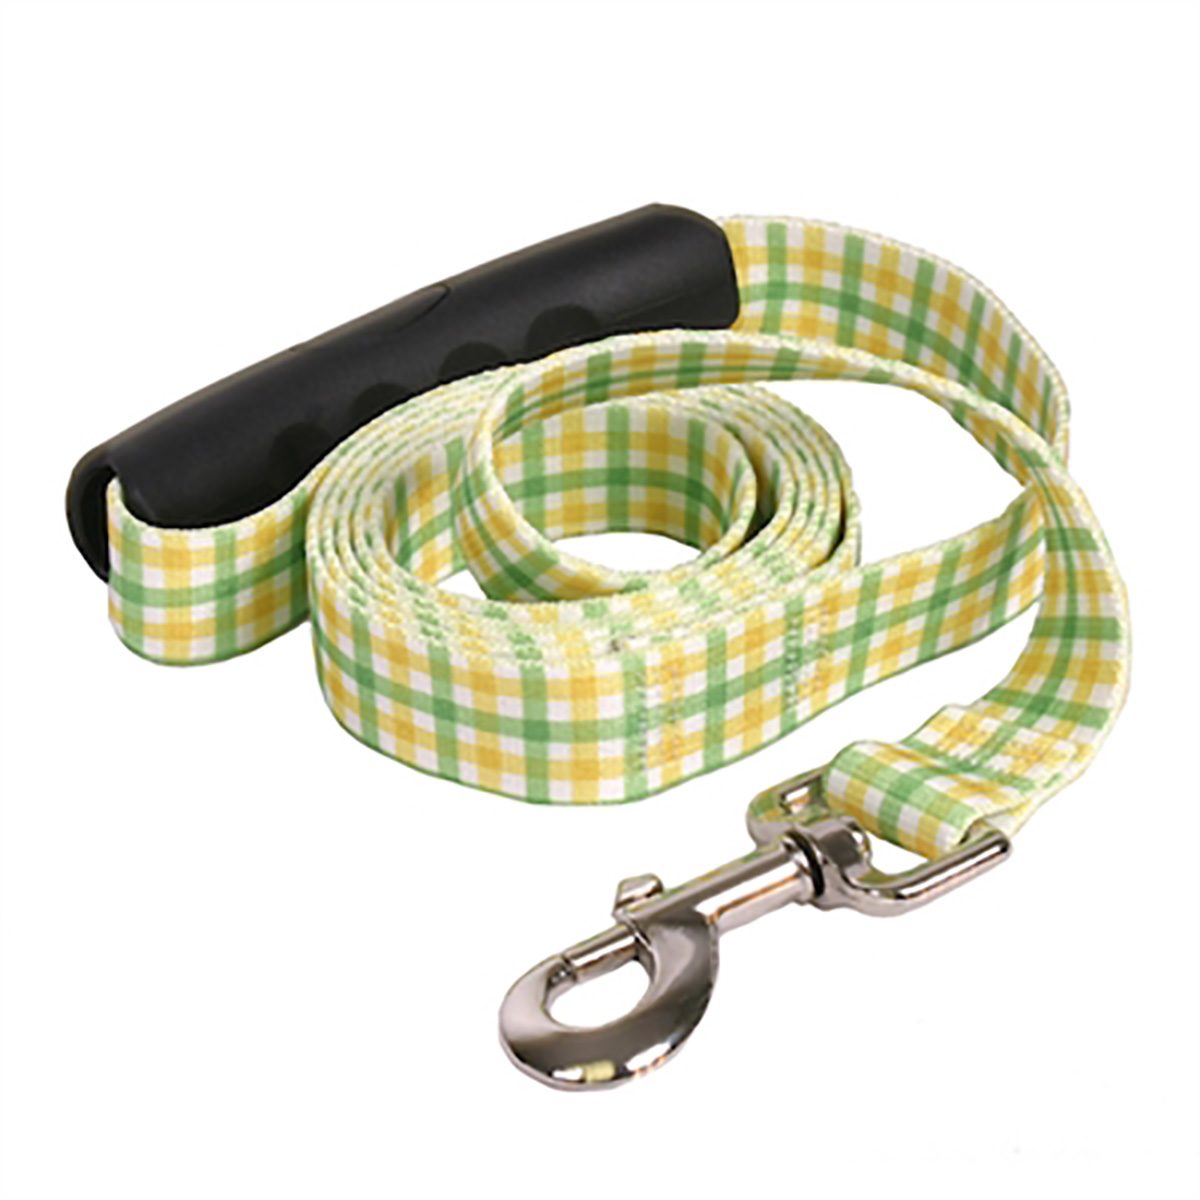 Southern Dawg Gingham EZ-Grip Dog Leash by Yellow Dog - Yellow and Green